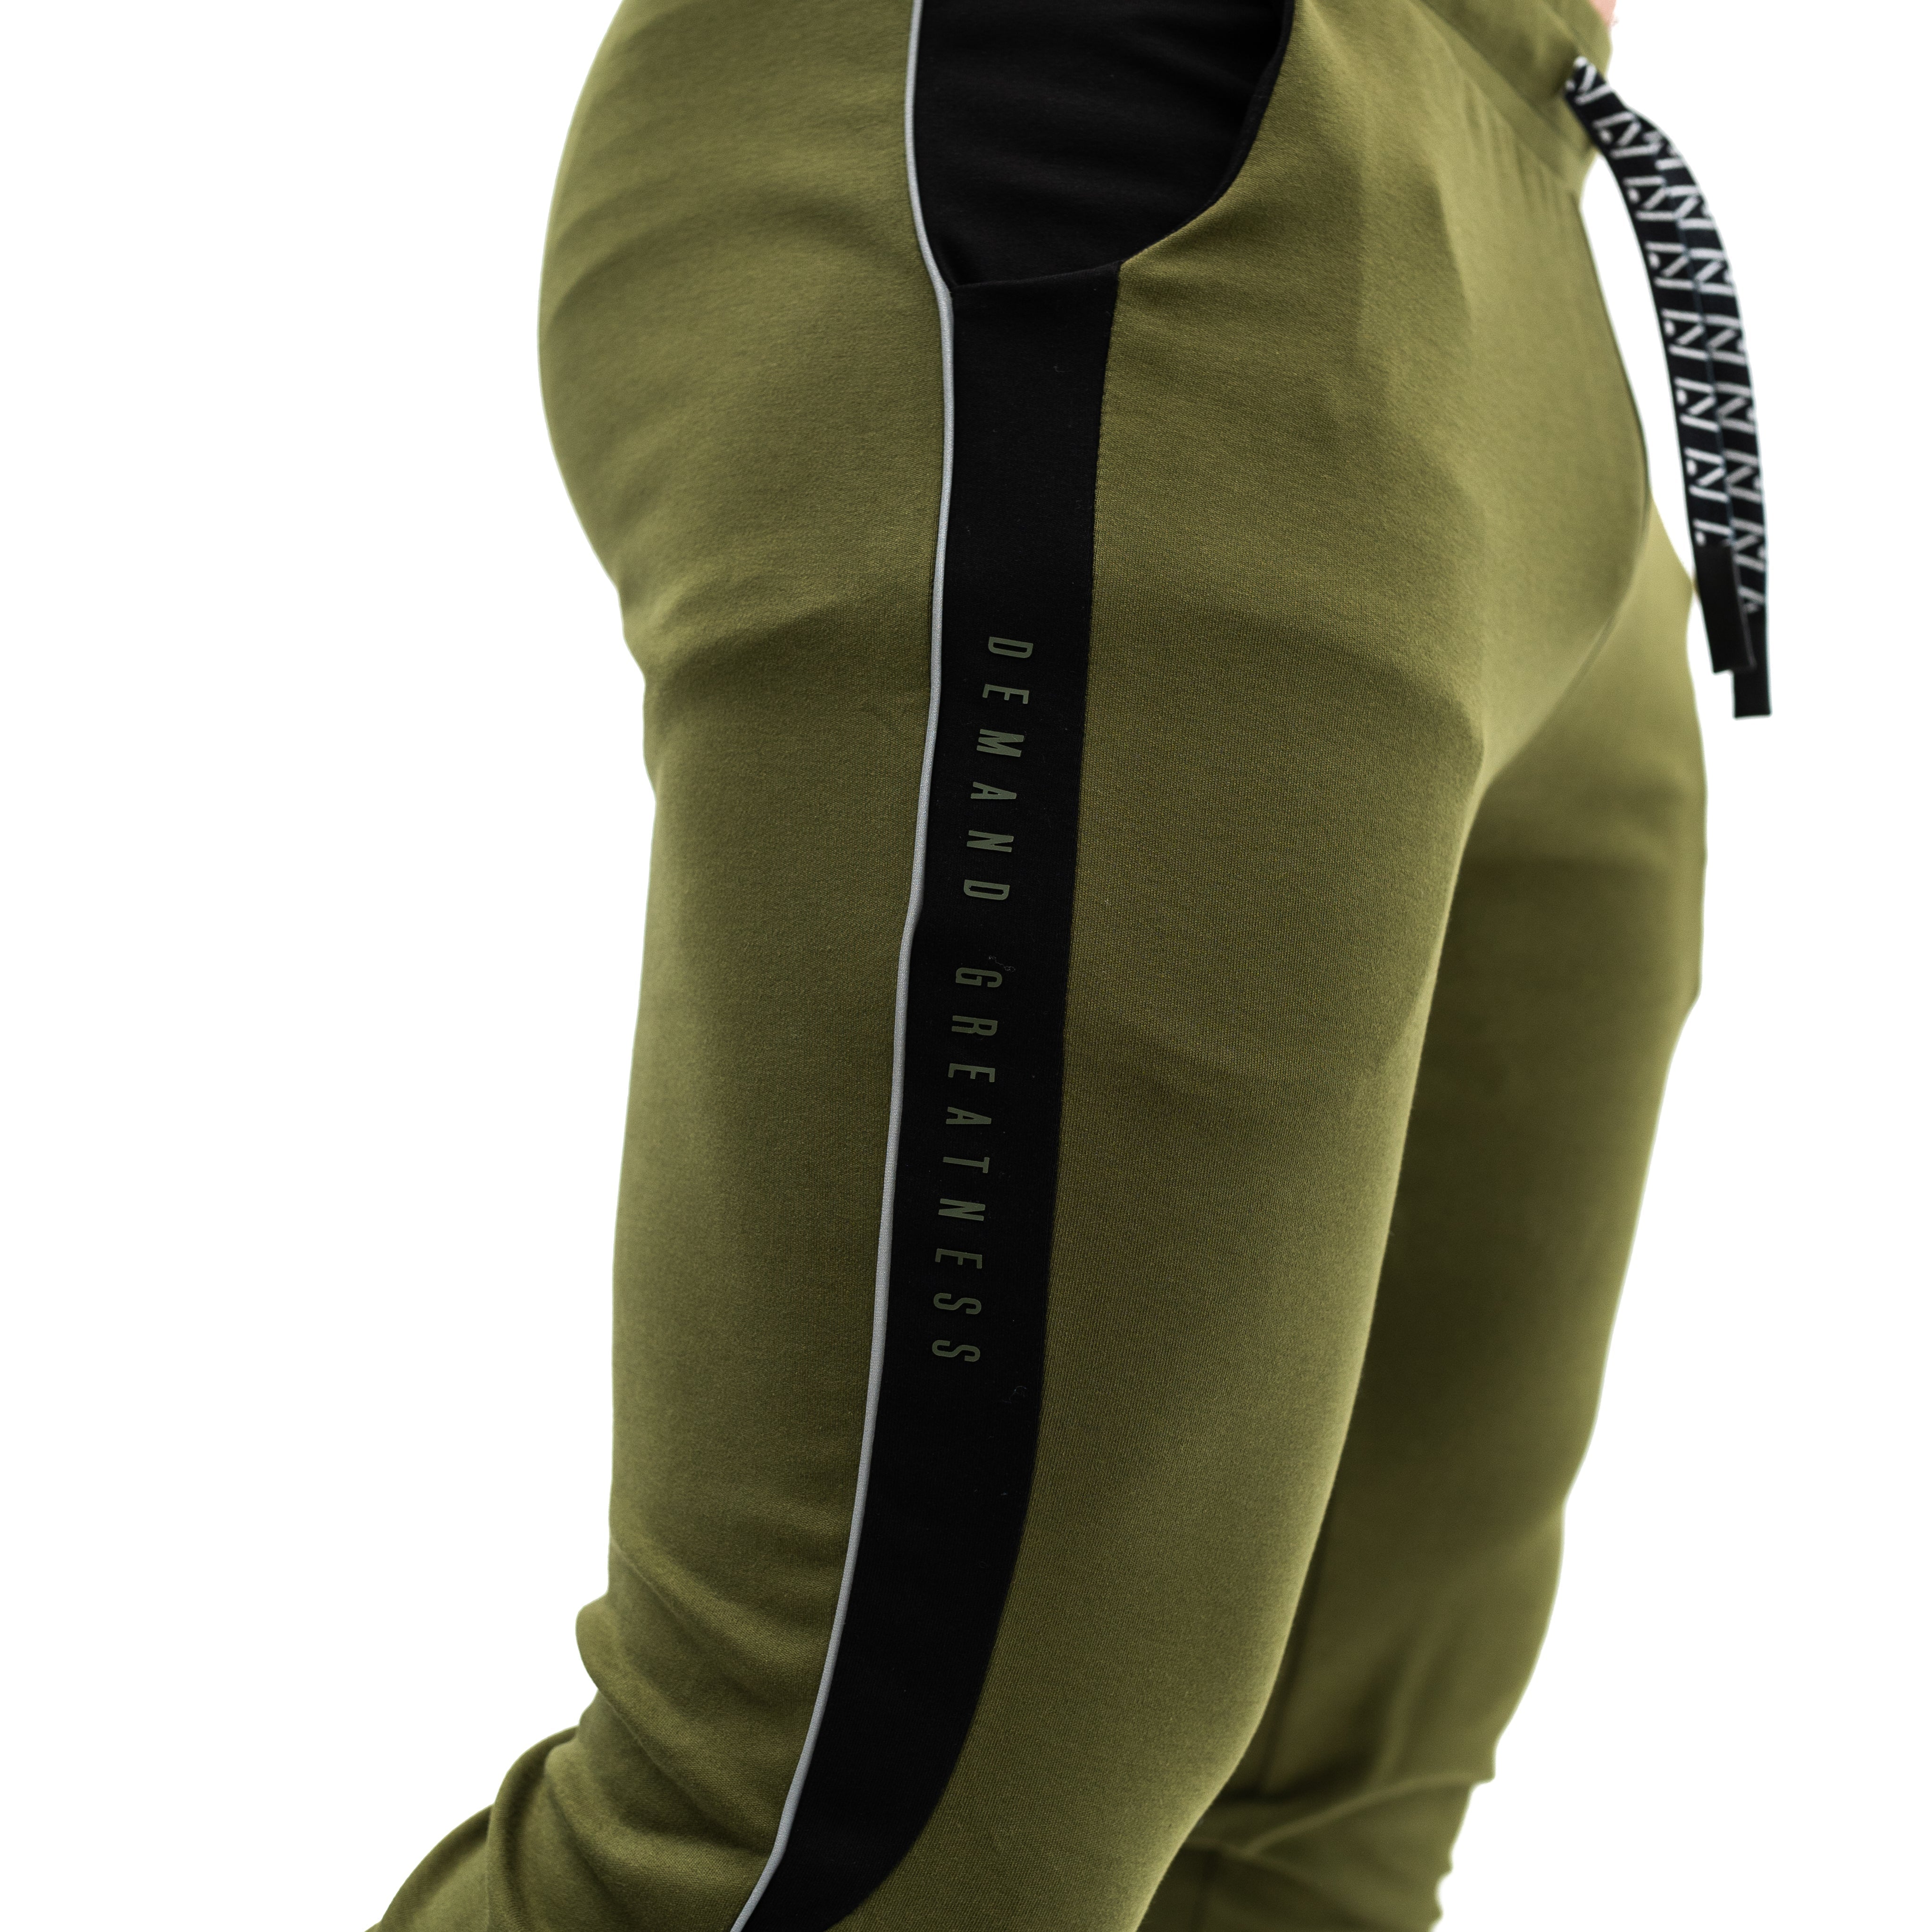 Our Moxie Joggers are made with premium cotton spandex fabric to keep you comfy throughout the day whether you are training or going out! Our Moxie Joggers contour to your body and feature a reflective stripe on both side, deep un-zippered pockets and stealth matte logos. Now in our new military colourway. You can purchase Military Moxie joggers from A7 UK or A7 Europe. A7 UK shipping to UK, Ireland, France, Italy, Germany, the Netherlands, Sweden and Poland.